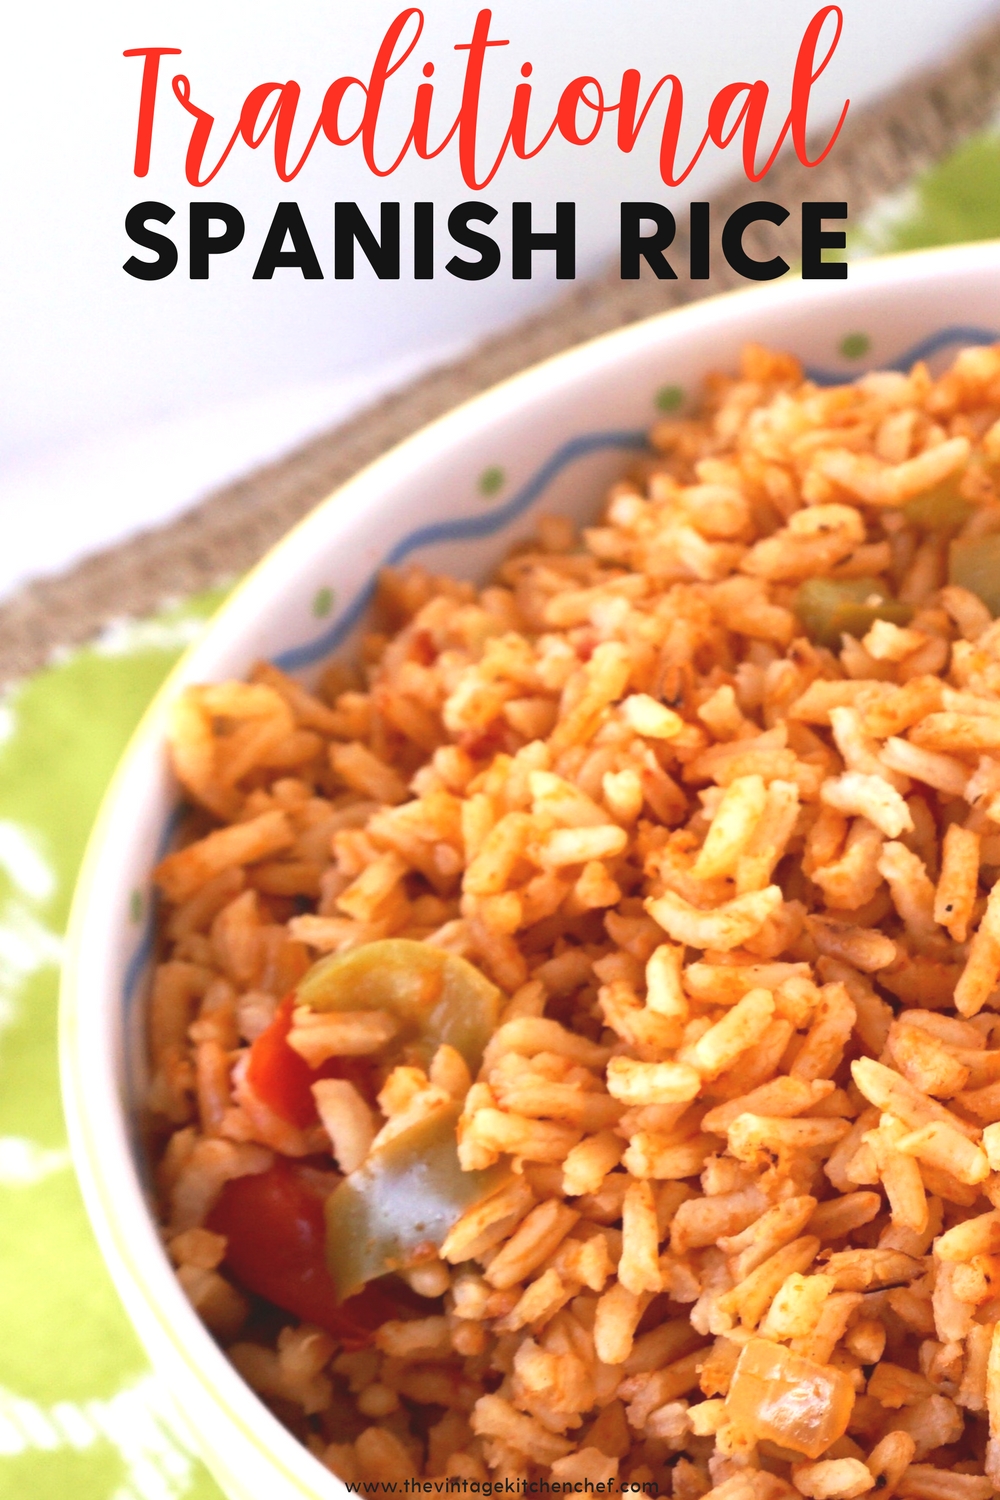 Easy and authentic Traditional Spanish Rice is the perfect accompaniment to tacos, grilled meats, fajitas or just about any dish with a Mexican flare.